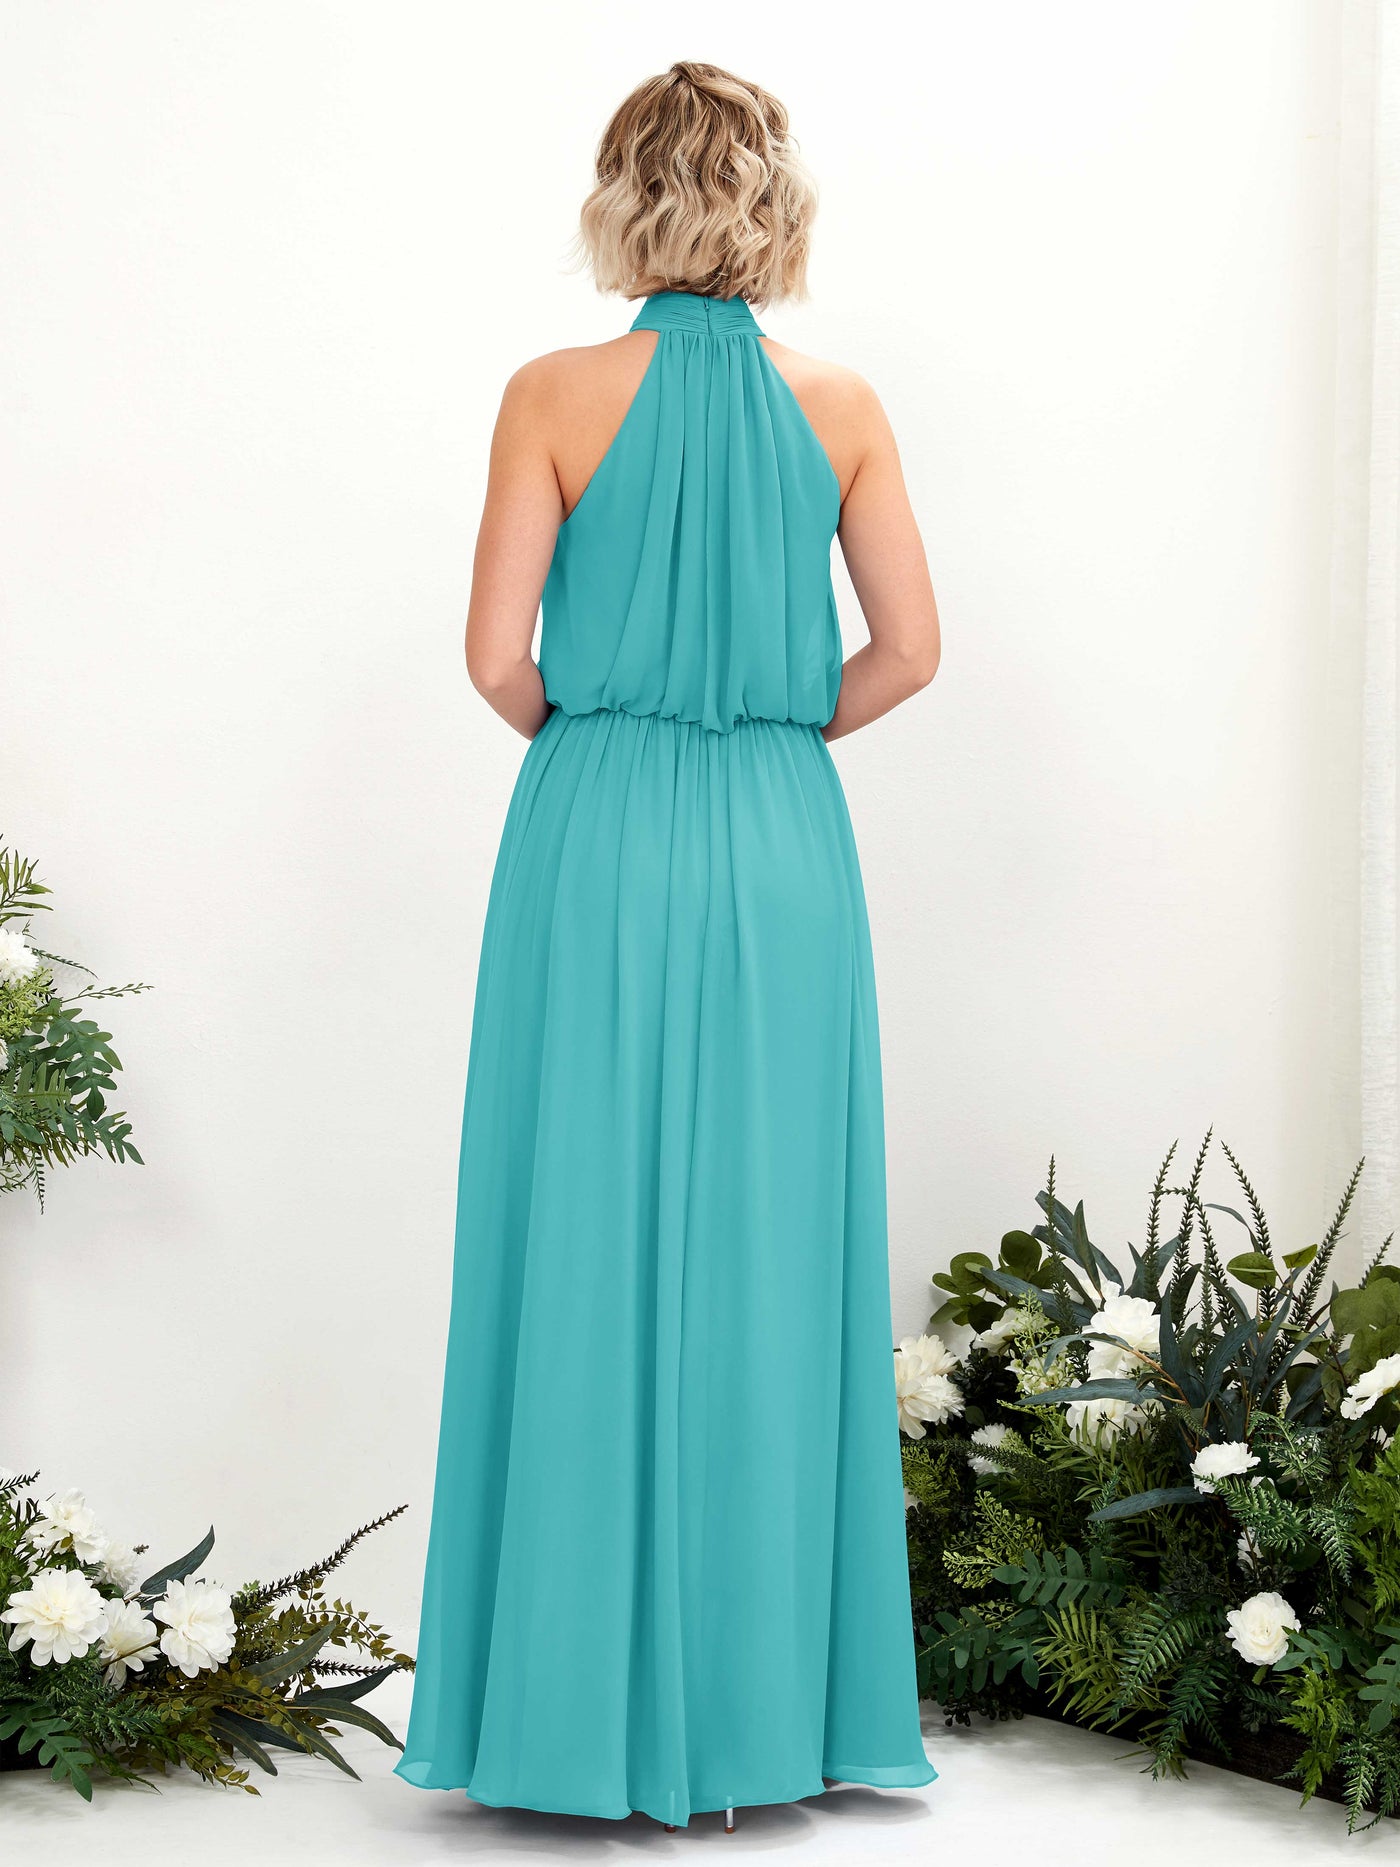 Turquoise Bridesmaid Dresses Bridesmaid Dress A-line Chiffon Halter Full Length Sleeveless Wedding Party Dress (81222923)#color_turquoise